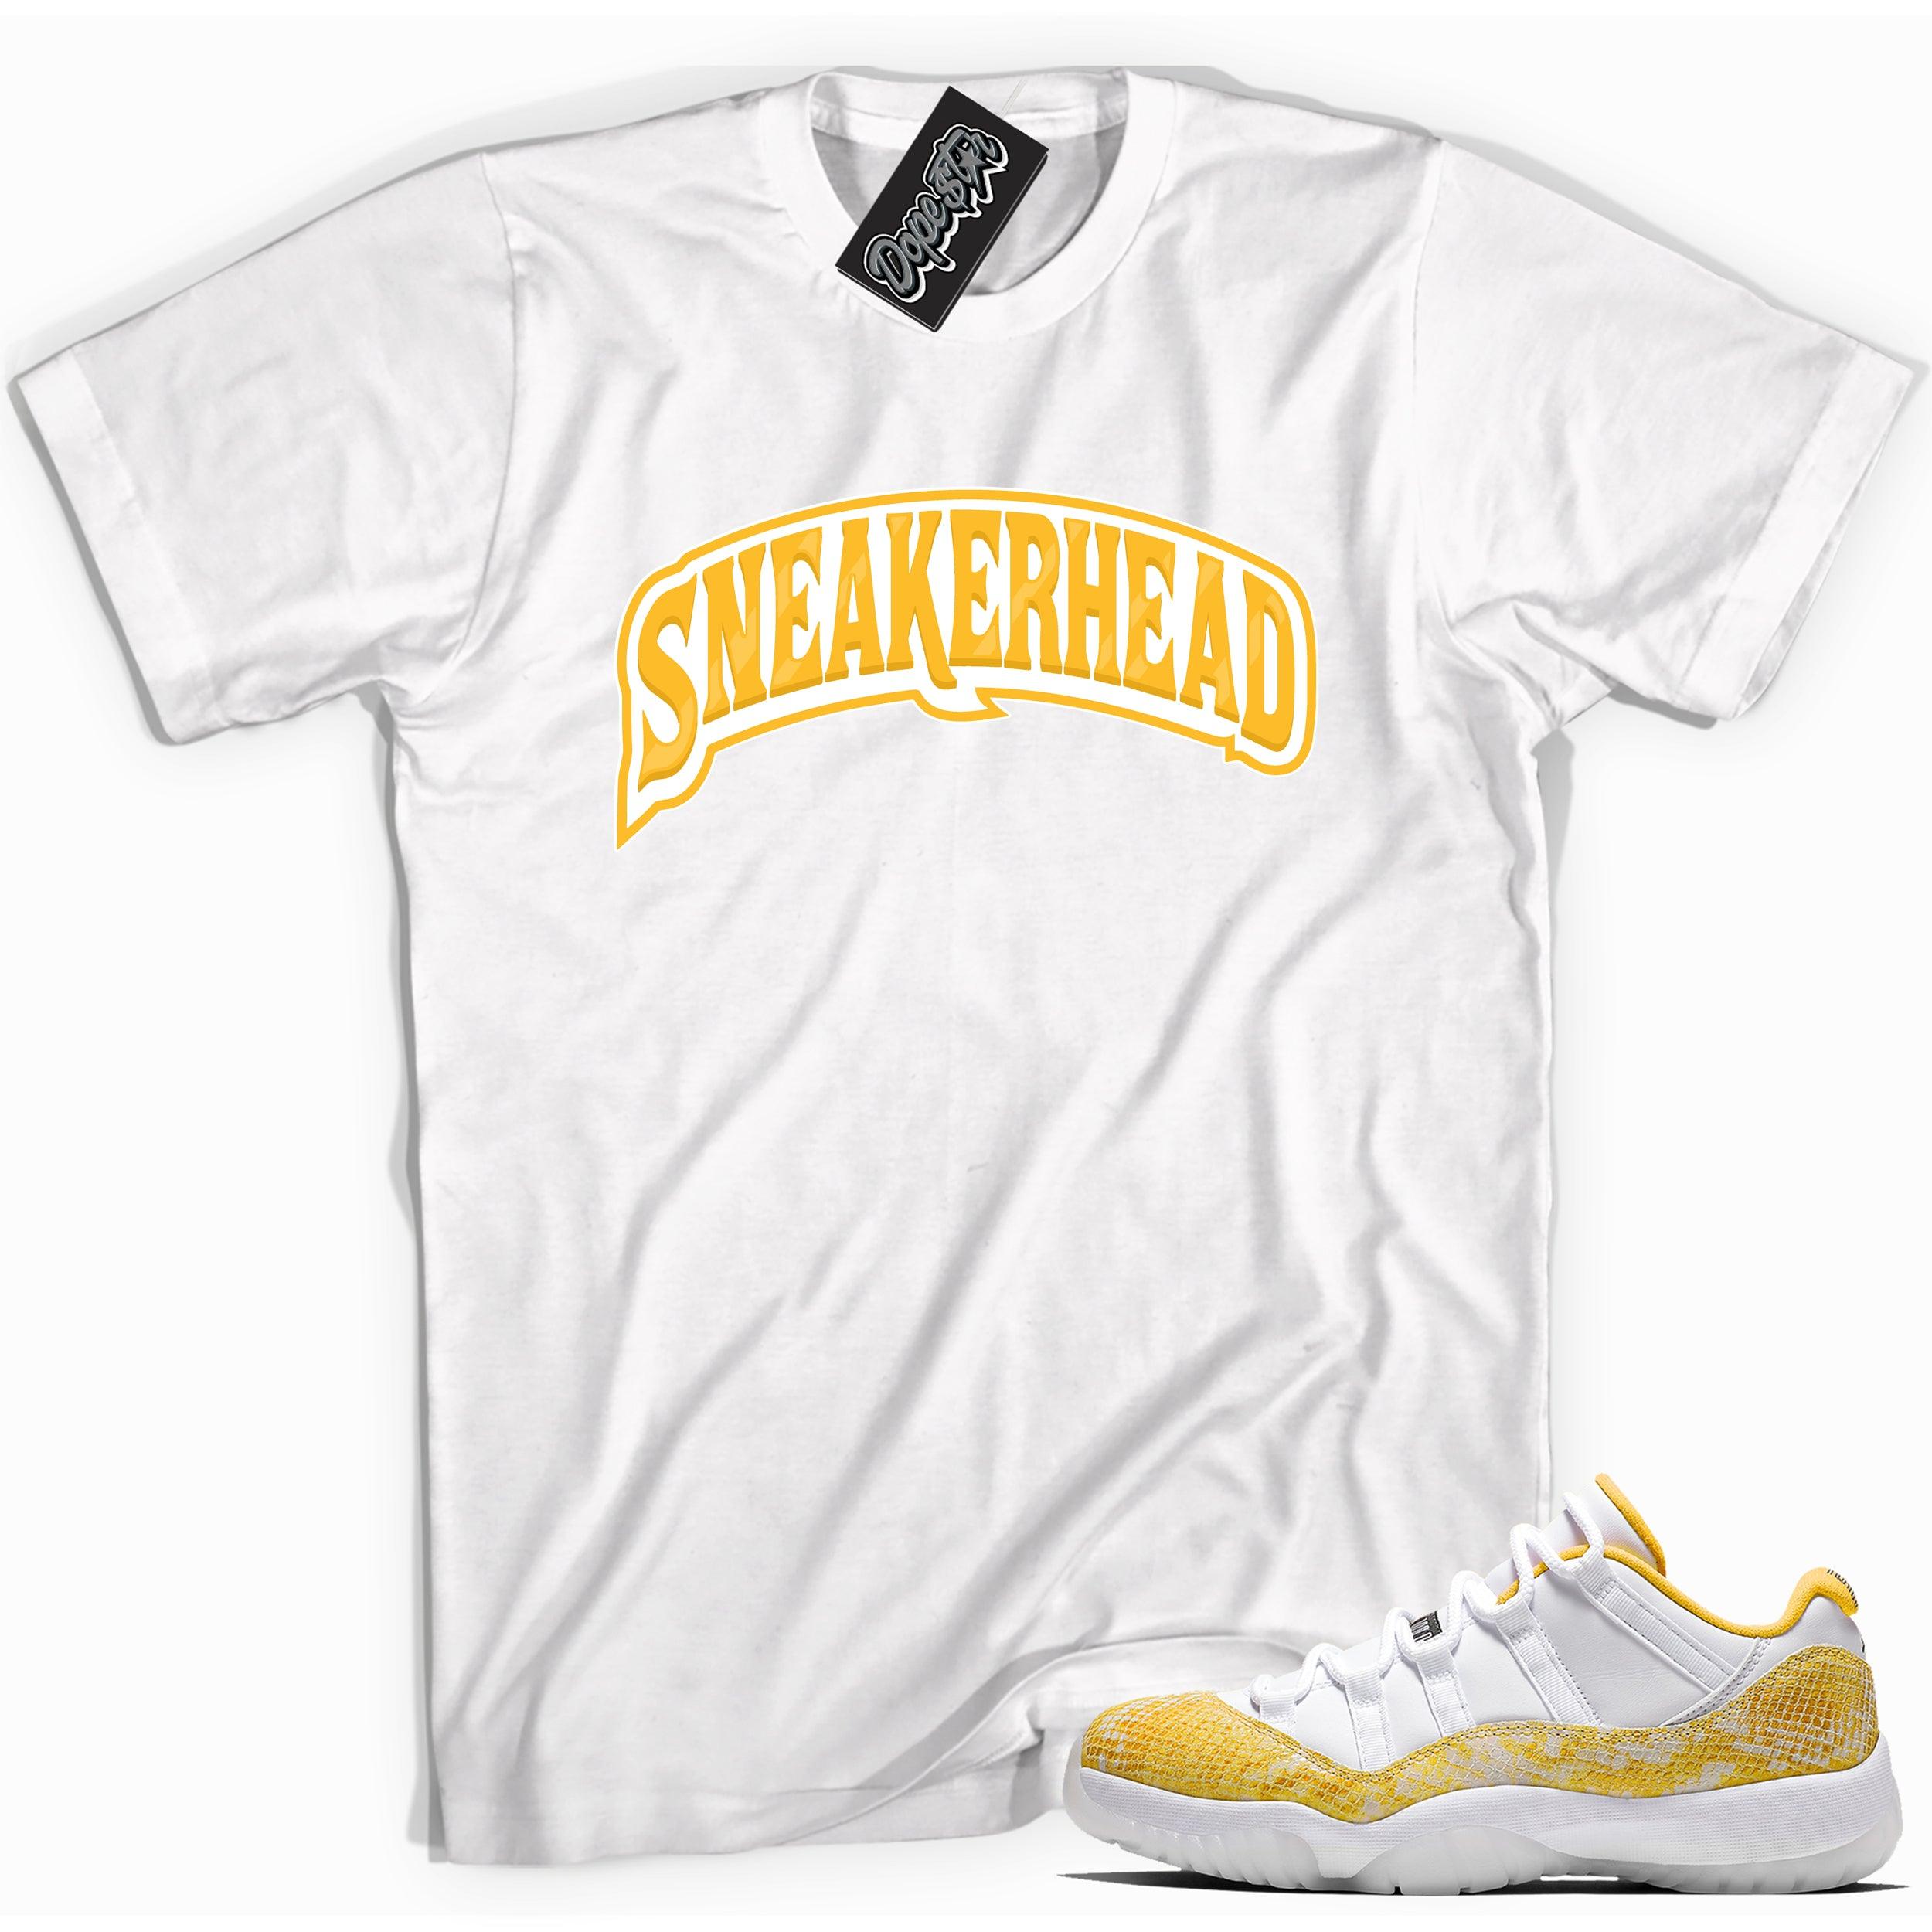 Cool white graphic tee with 'sneaker head' print, that perfectly matches Air Jordan 11 Retro Low Yellow Snakeskin sneakers